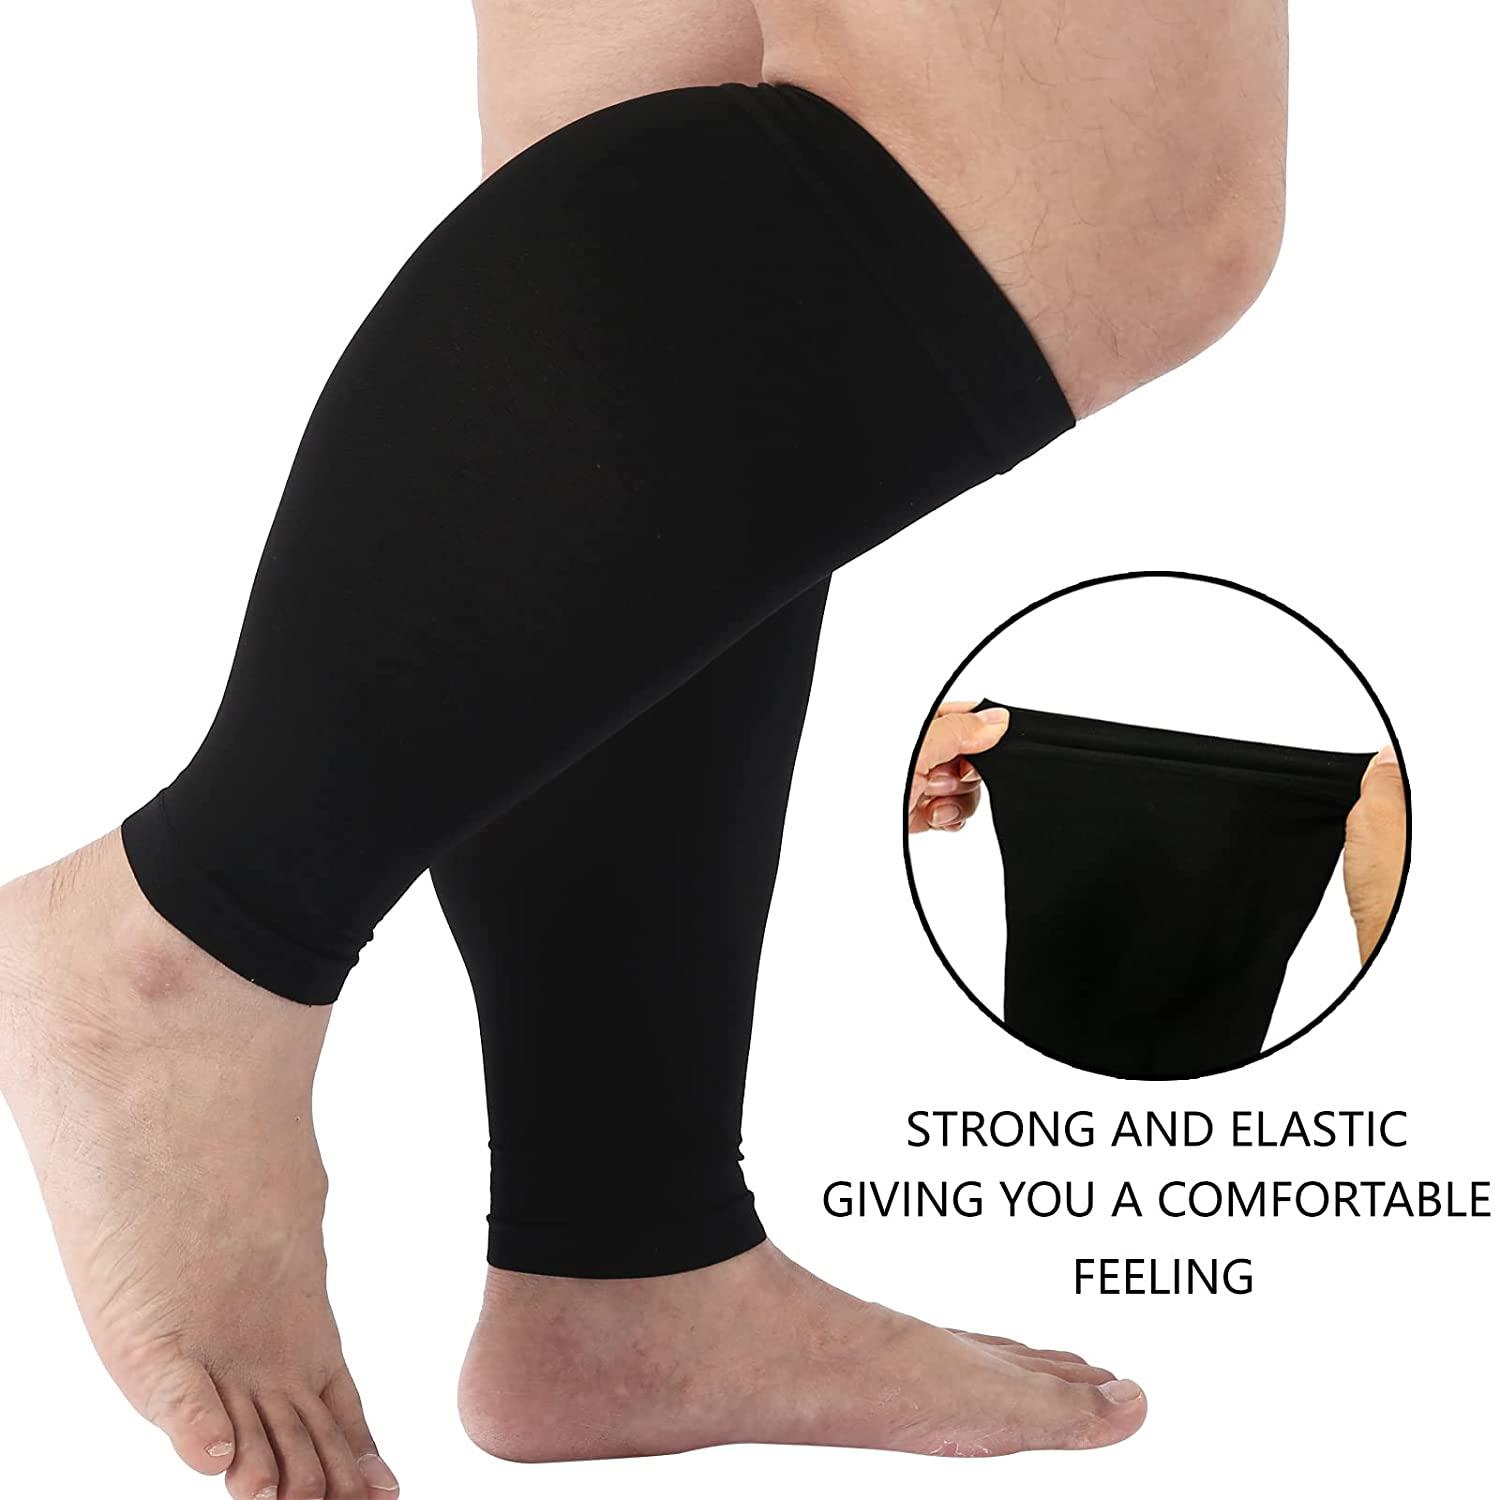 Plus Size Compression Sleeves for Calves Women Wide Calf Compression Legs  Sleeves Men 4XL, Relieve Varicose Veins, Edema, Swelling, Soreness, Shin  splints, for Work, Travel, Sports and Daily Wear Black XXXX-Large